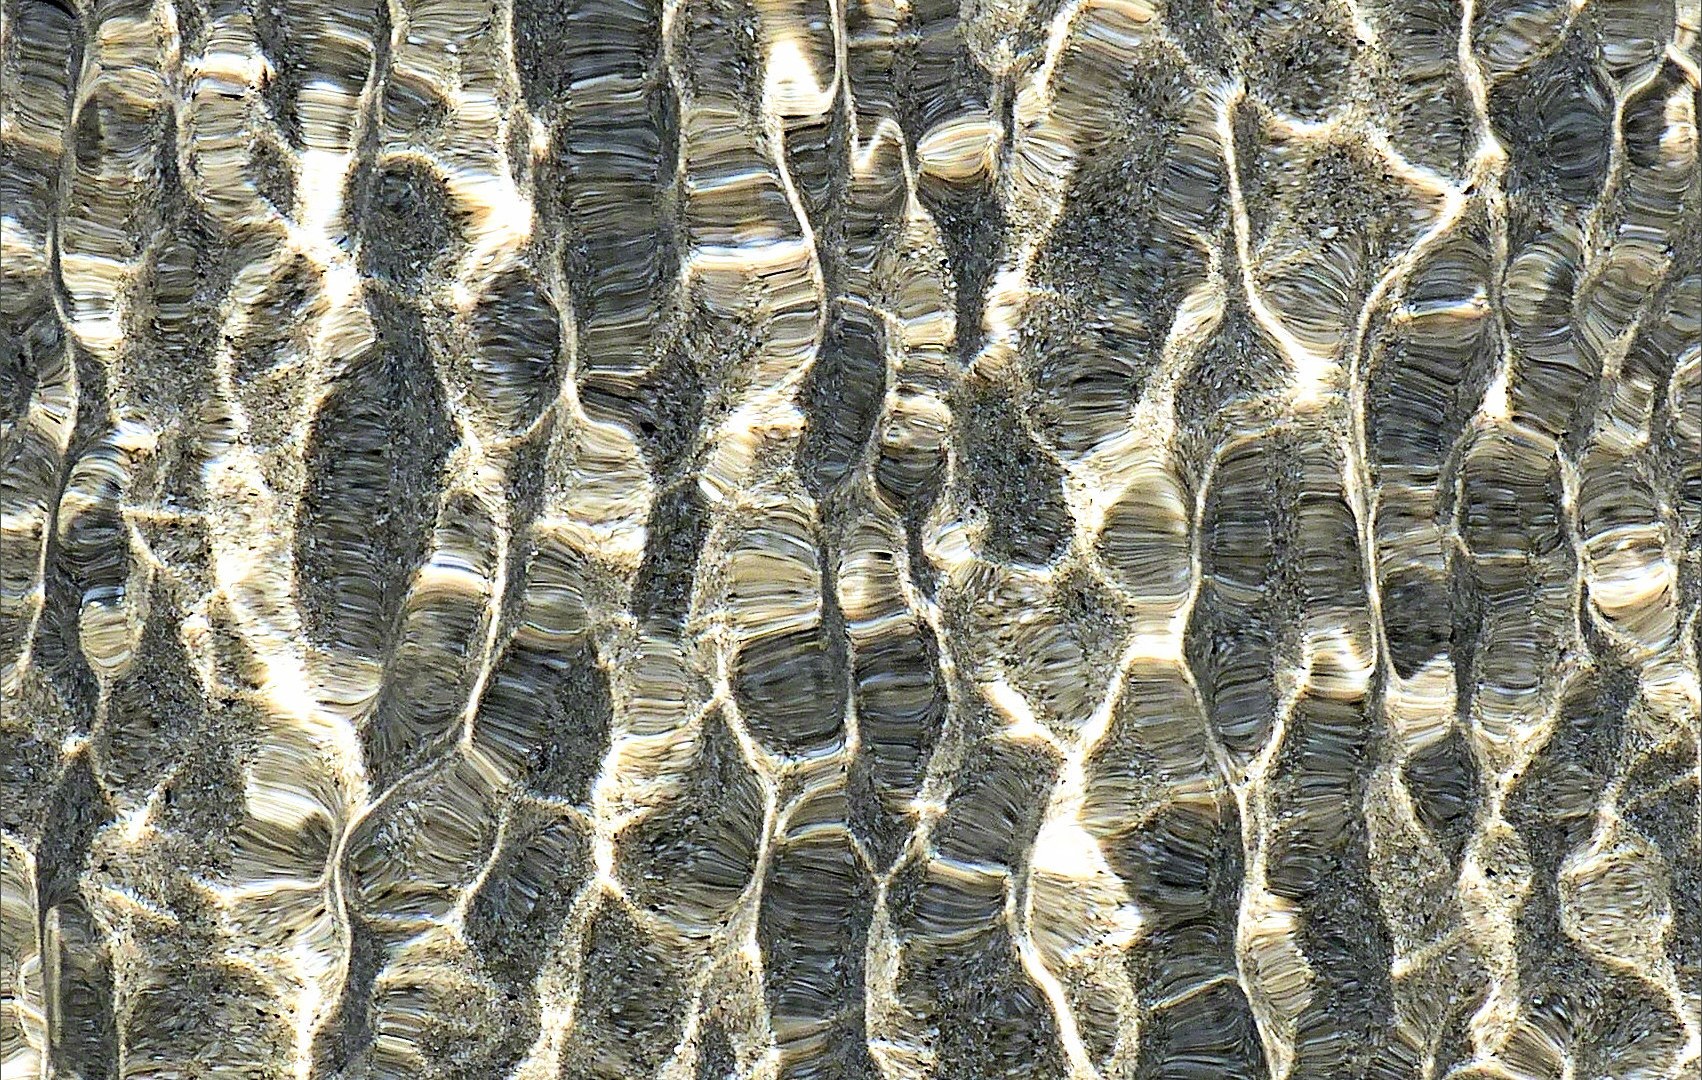 Refracted light on shallow tide pool rippled water